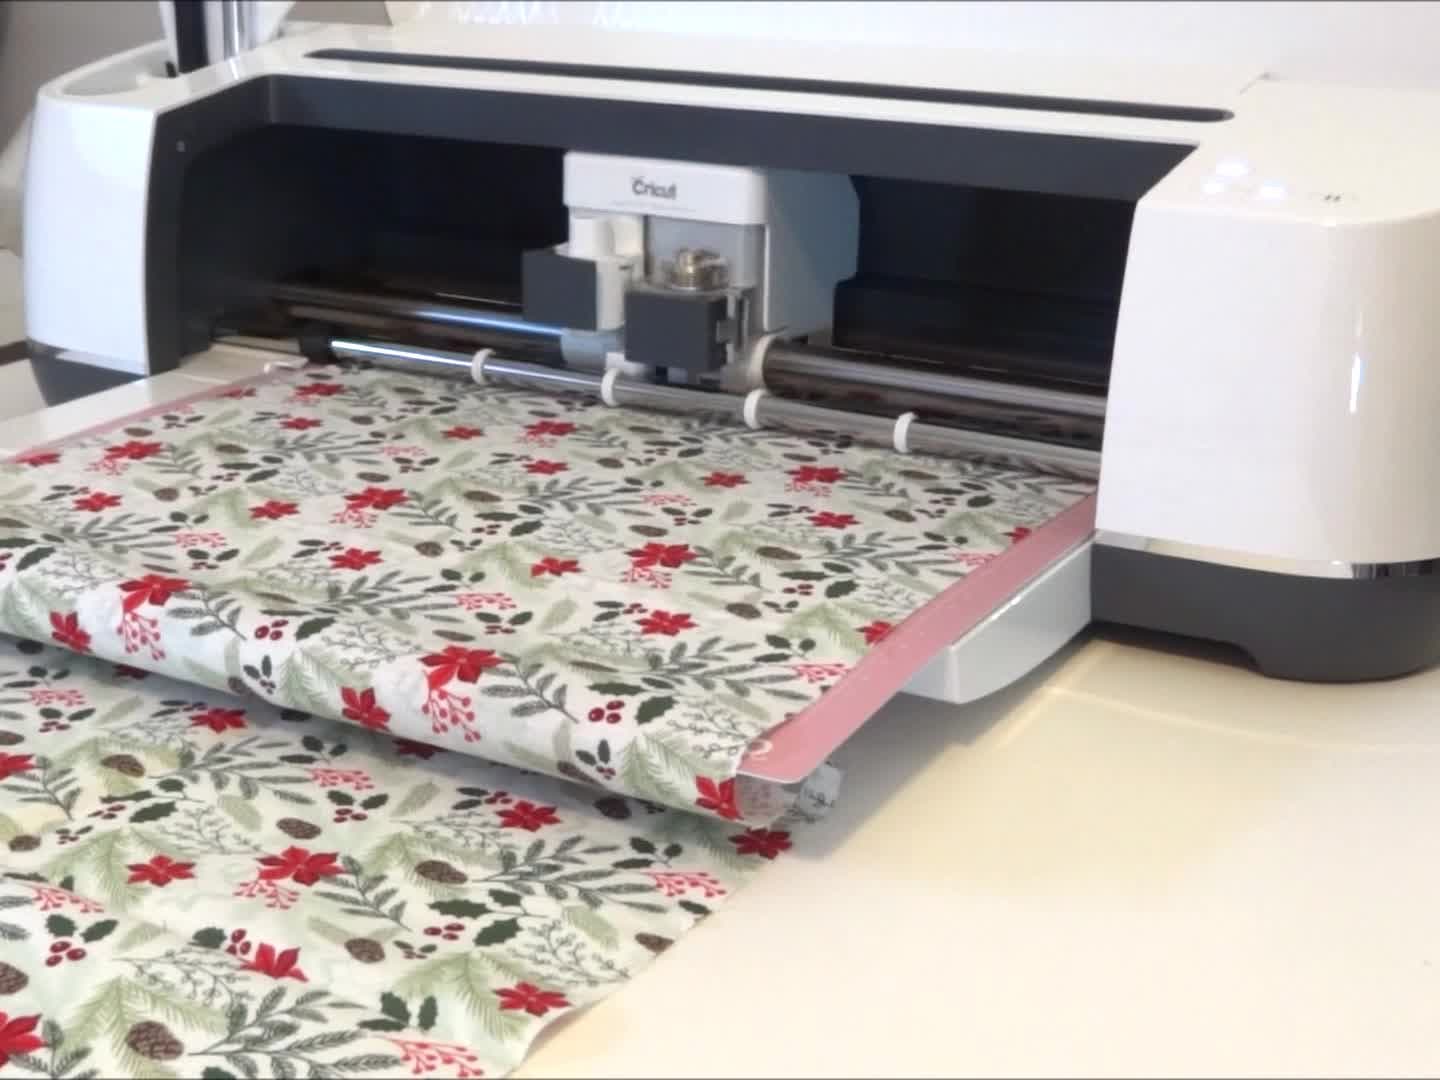 How to Clean a Cricut Mat and Make it Stick Again — Pro Housekeepers